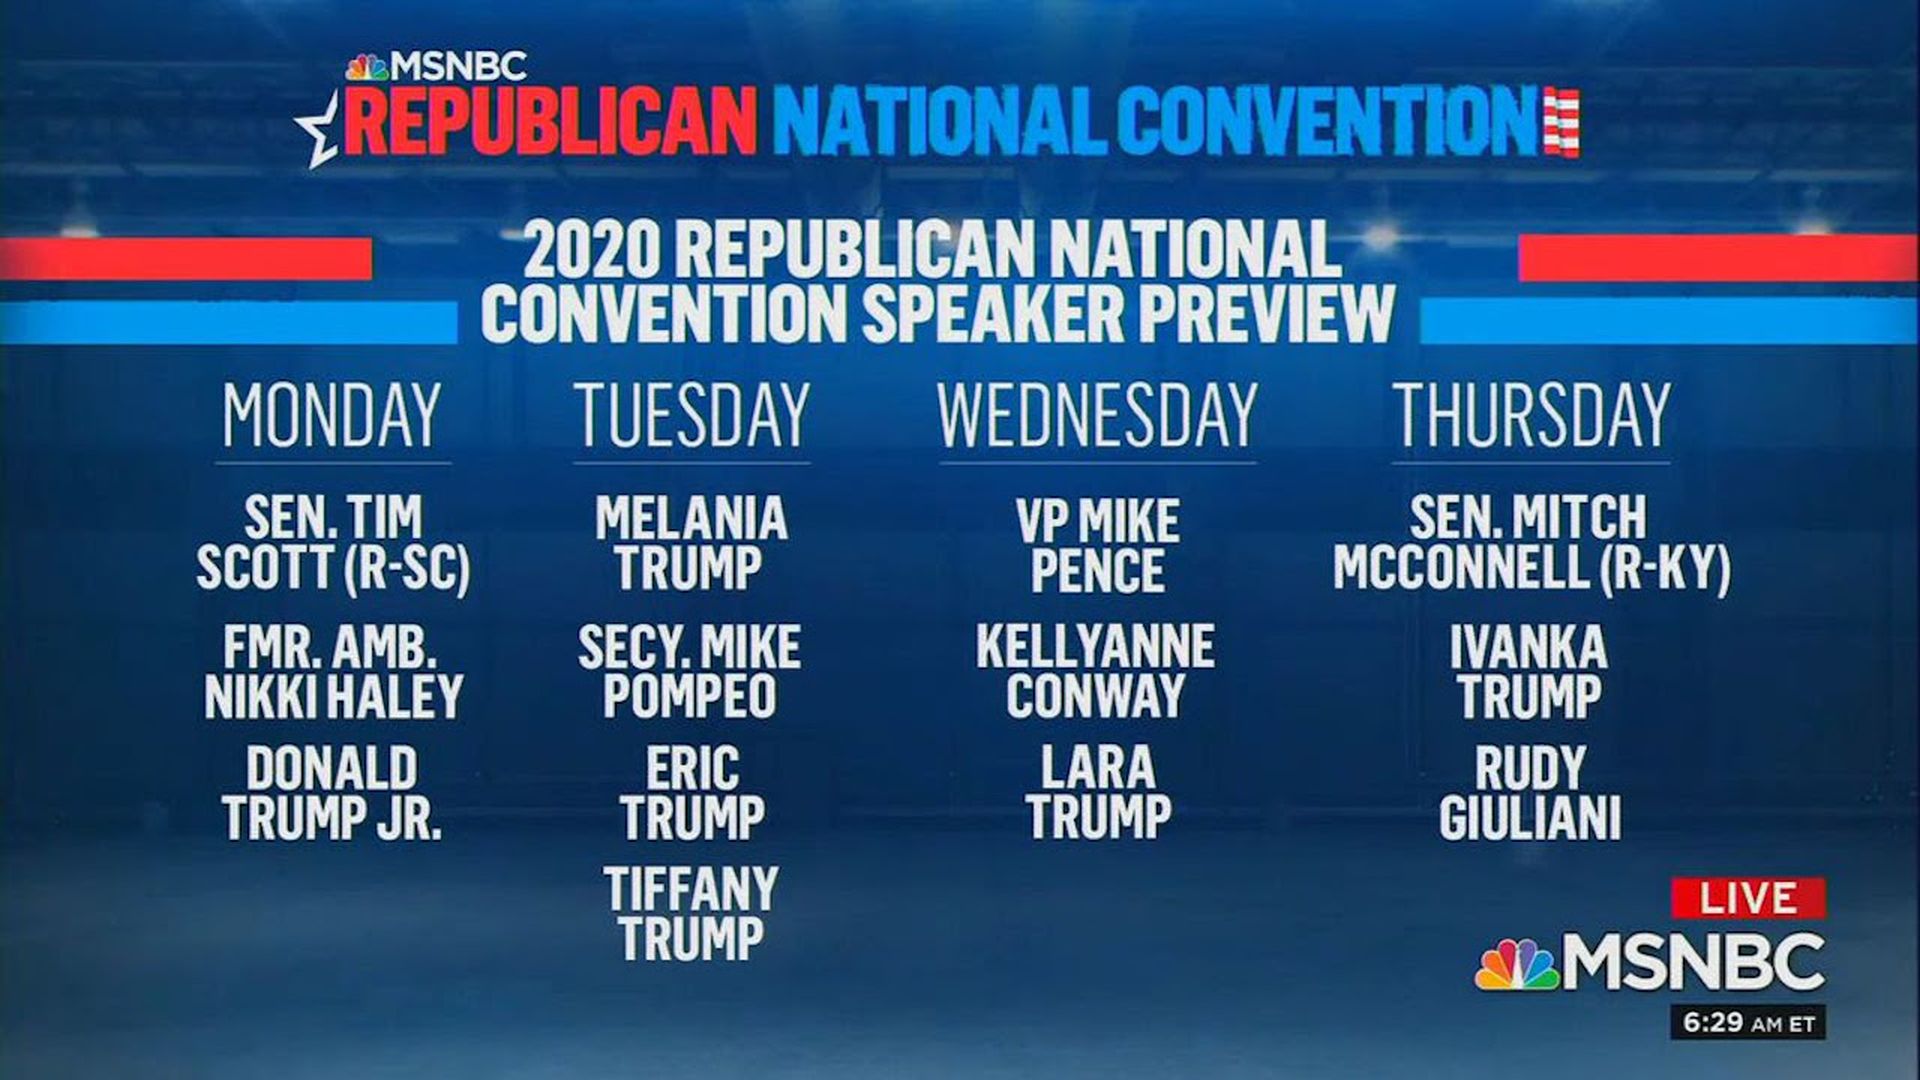 Screenshot of the lineup for RNC speakers